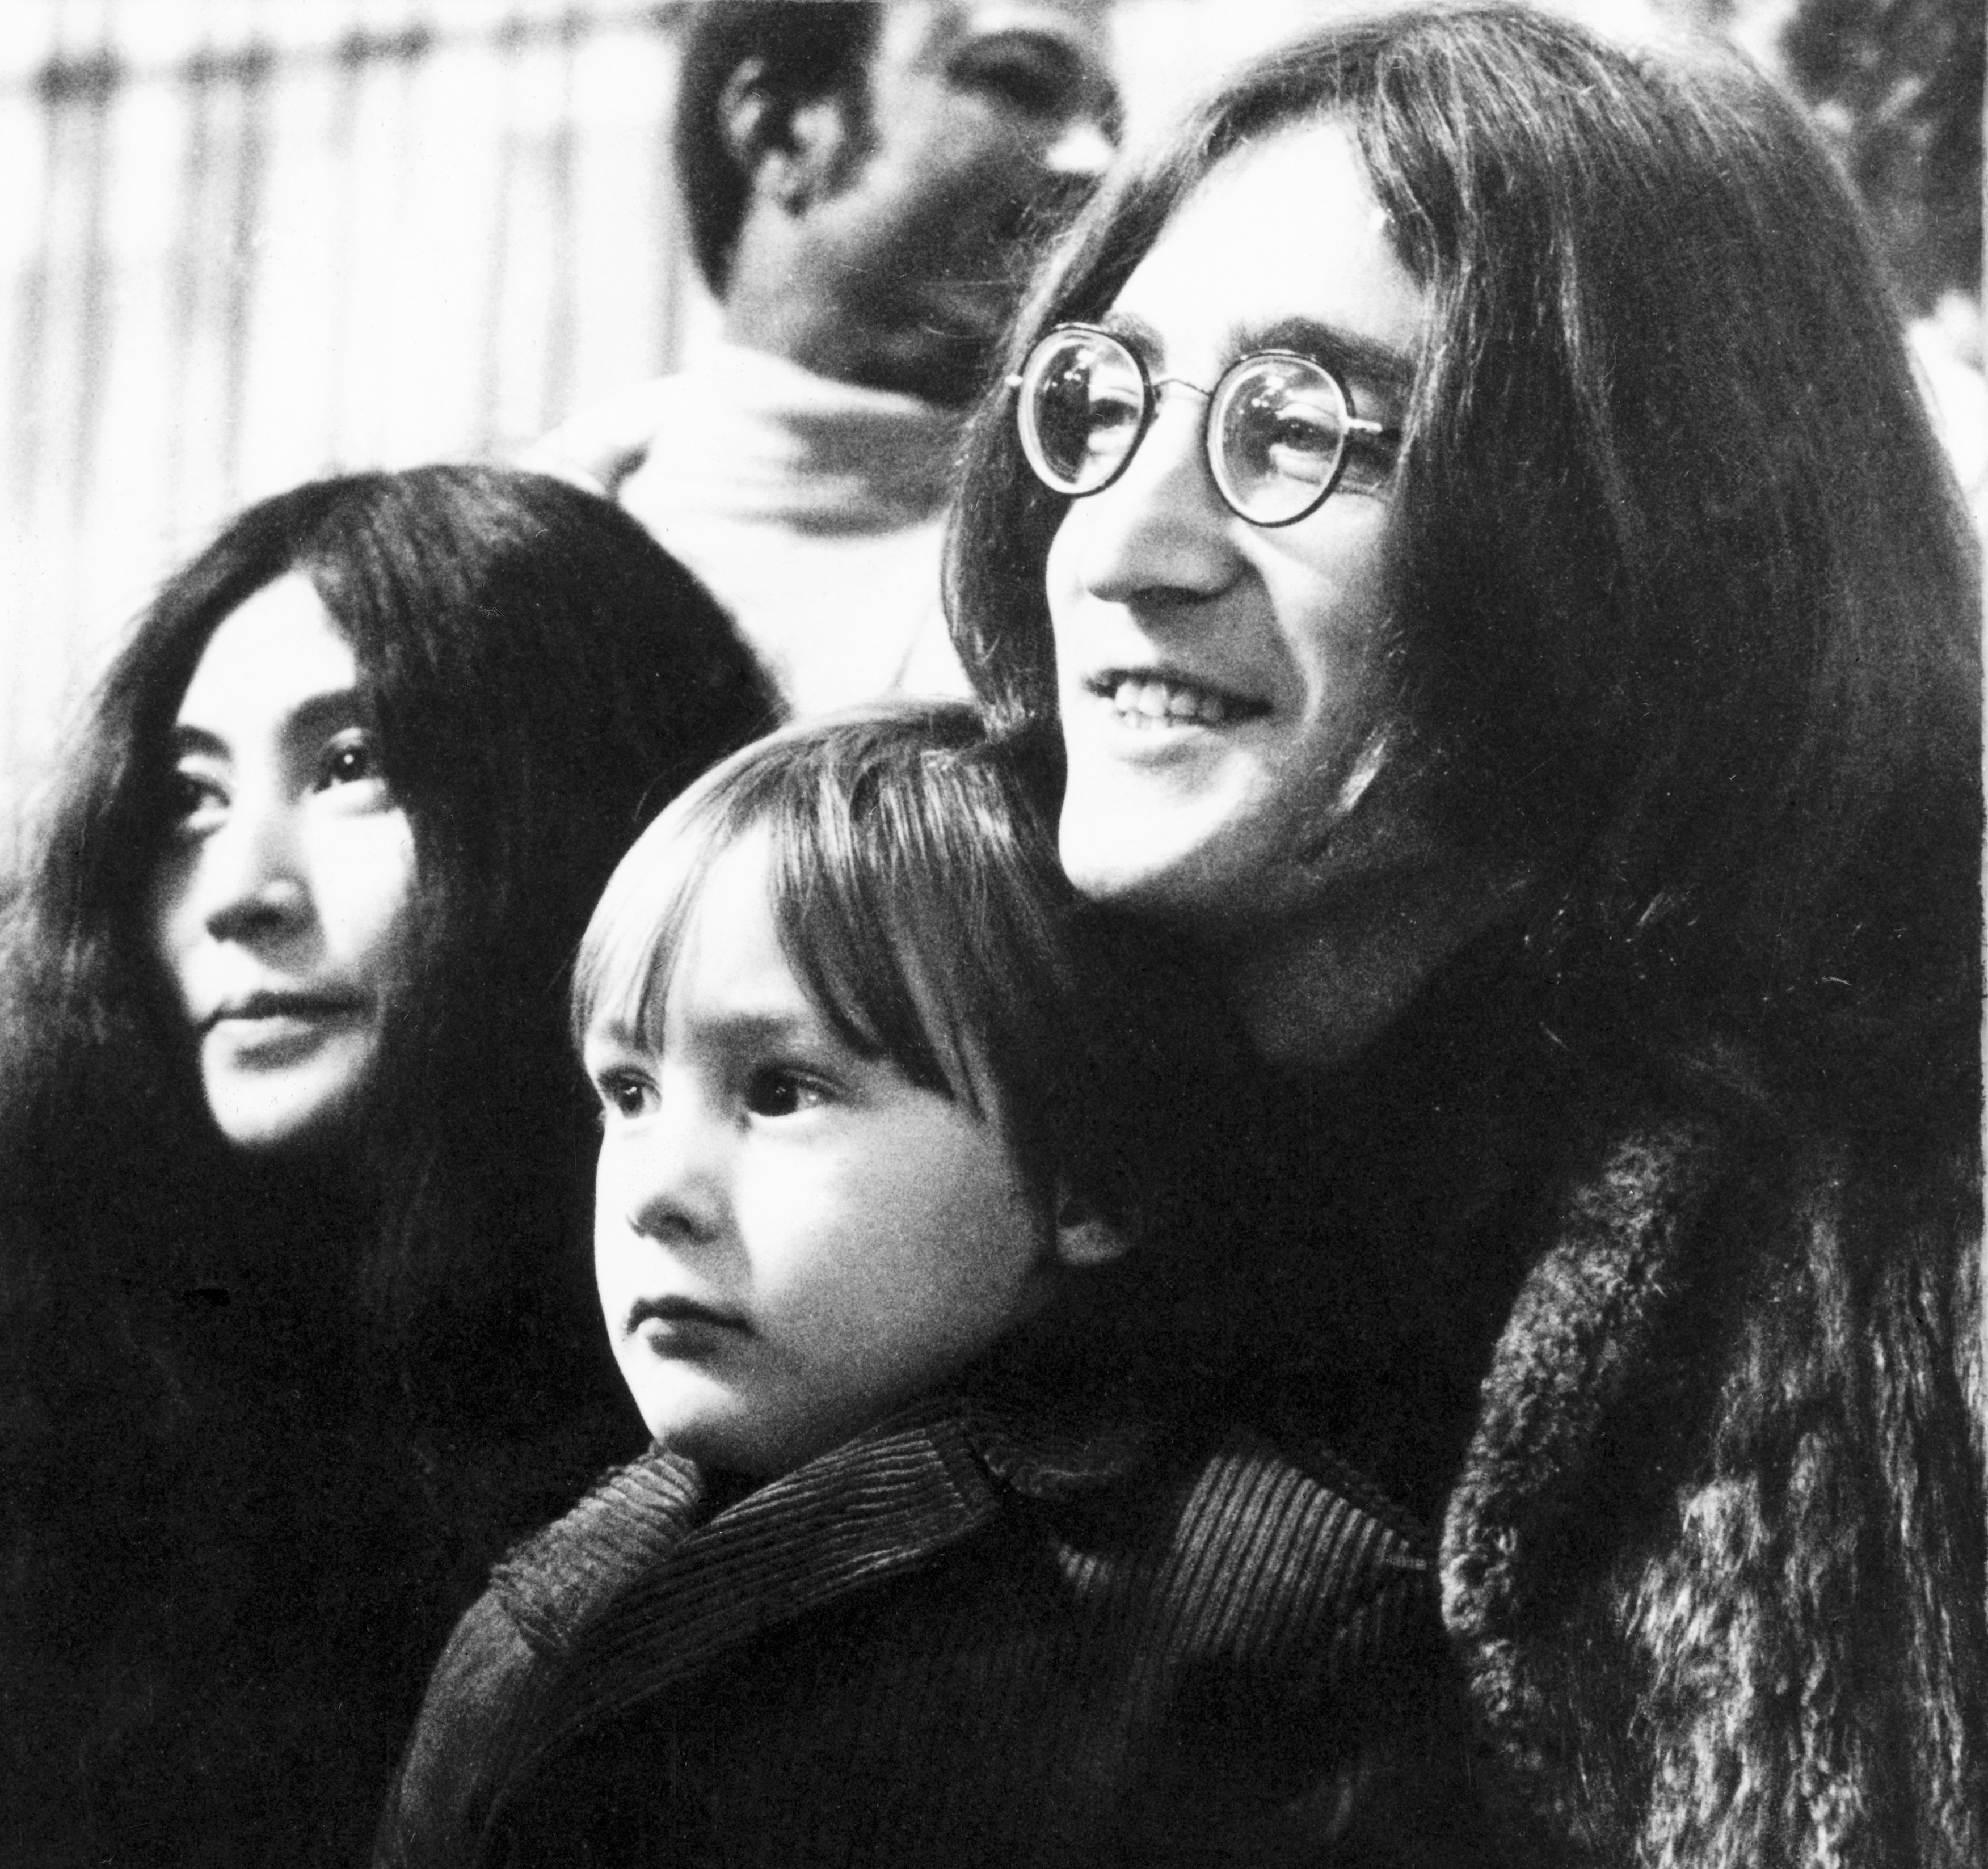 John Lennon and Yoko Ono with their son Julian in 1969 | Source: Getty Images